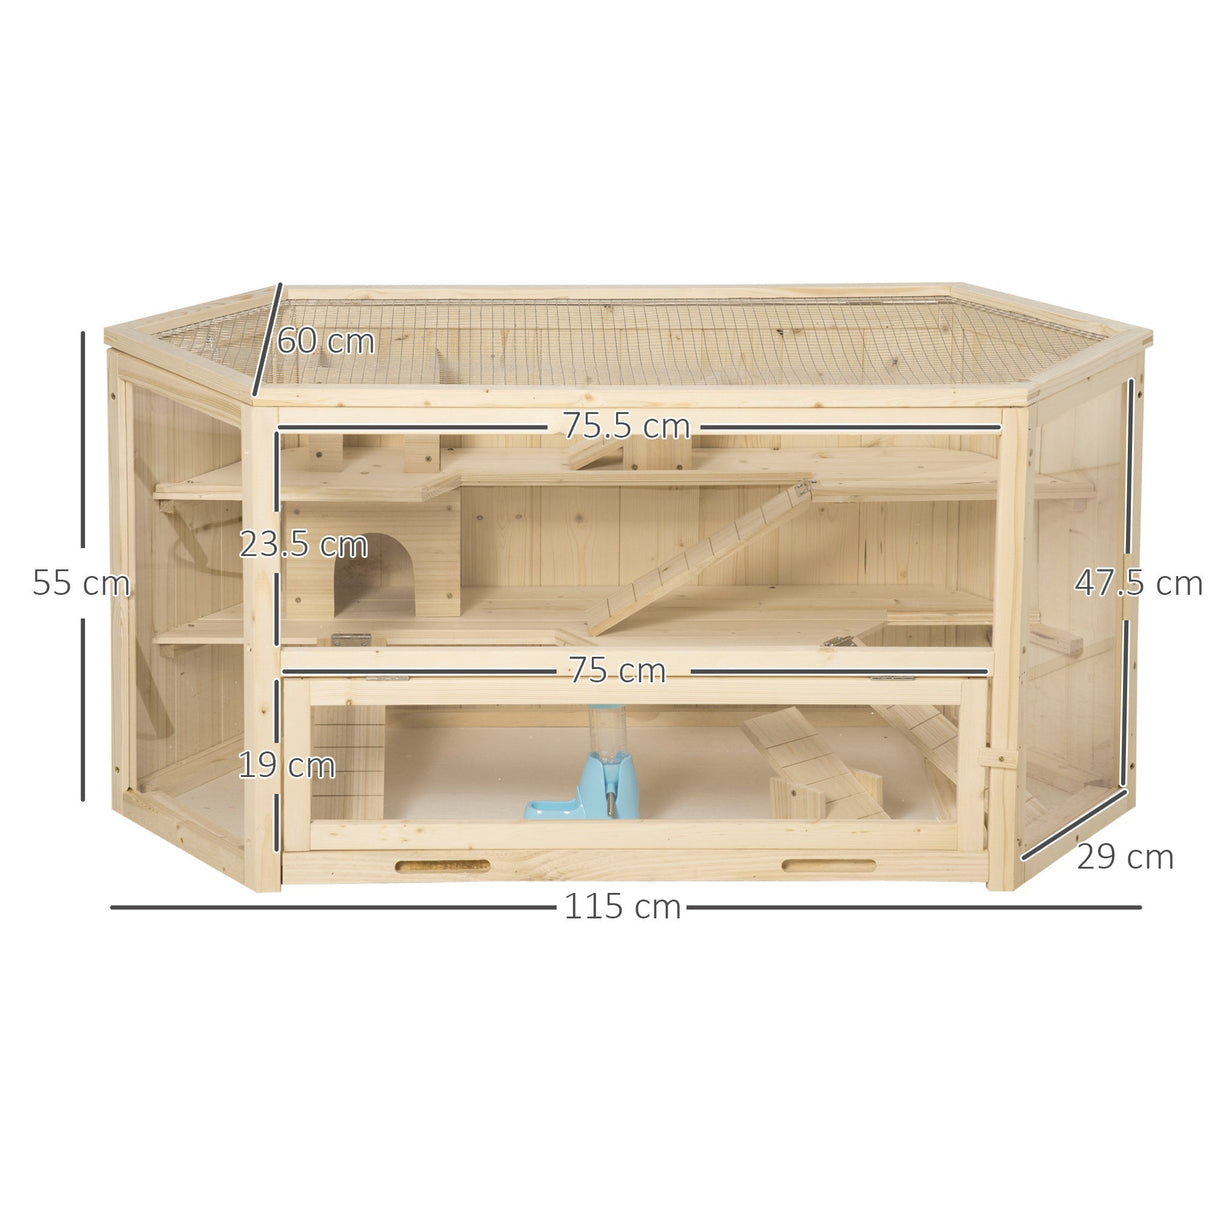 3-Tier Wooden Hamster Cage with Entertainment Features, PawHut,